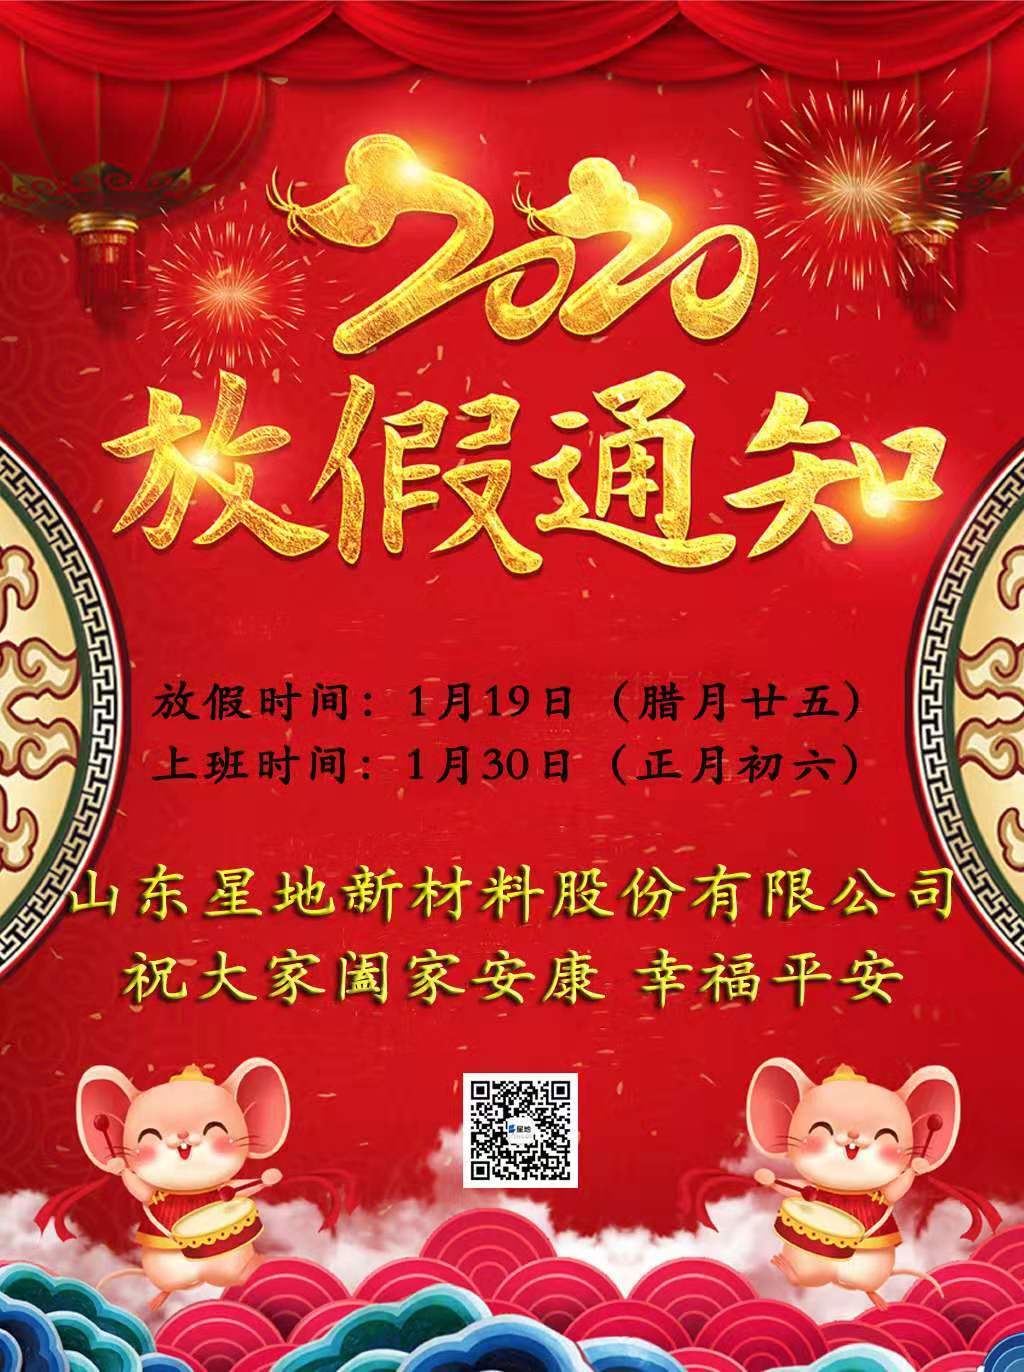 Shandong Xingdi New Material Co., Ltd. wishes you a happy Chinese New Year